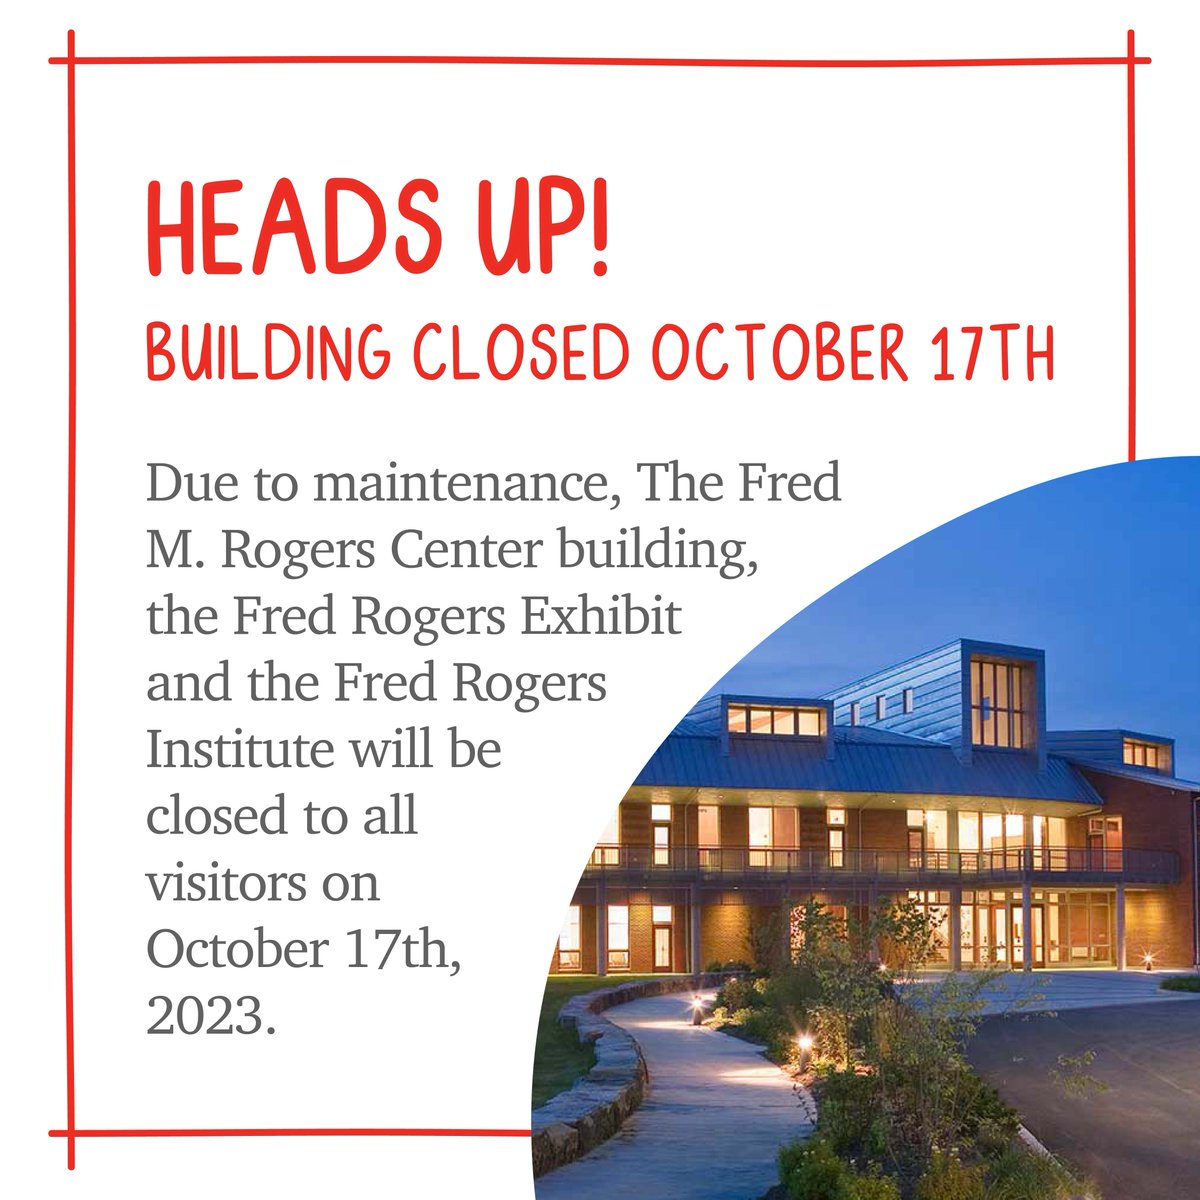 On Tuesday, October 17th, 2023, the Fred M. Rogers Center Building, Exhibit and Institute will be temporarily closed to all visitors for scheduled maintenance! We apologize for any inconvenience this may cause and appreciate your understanding. #MaintenanceMode